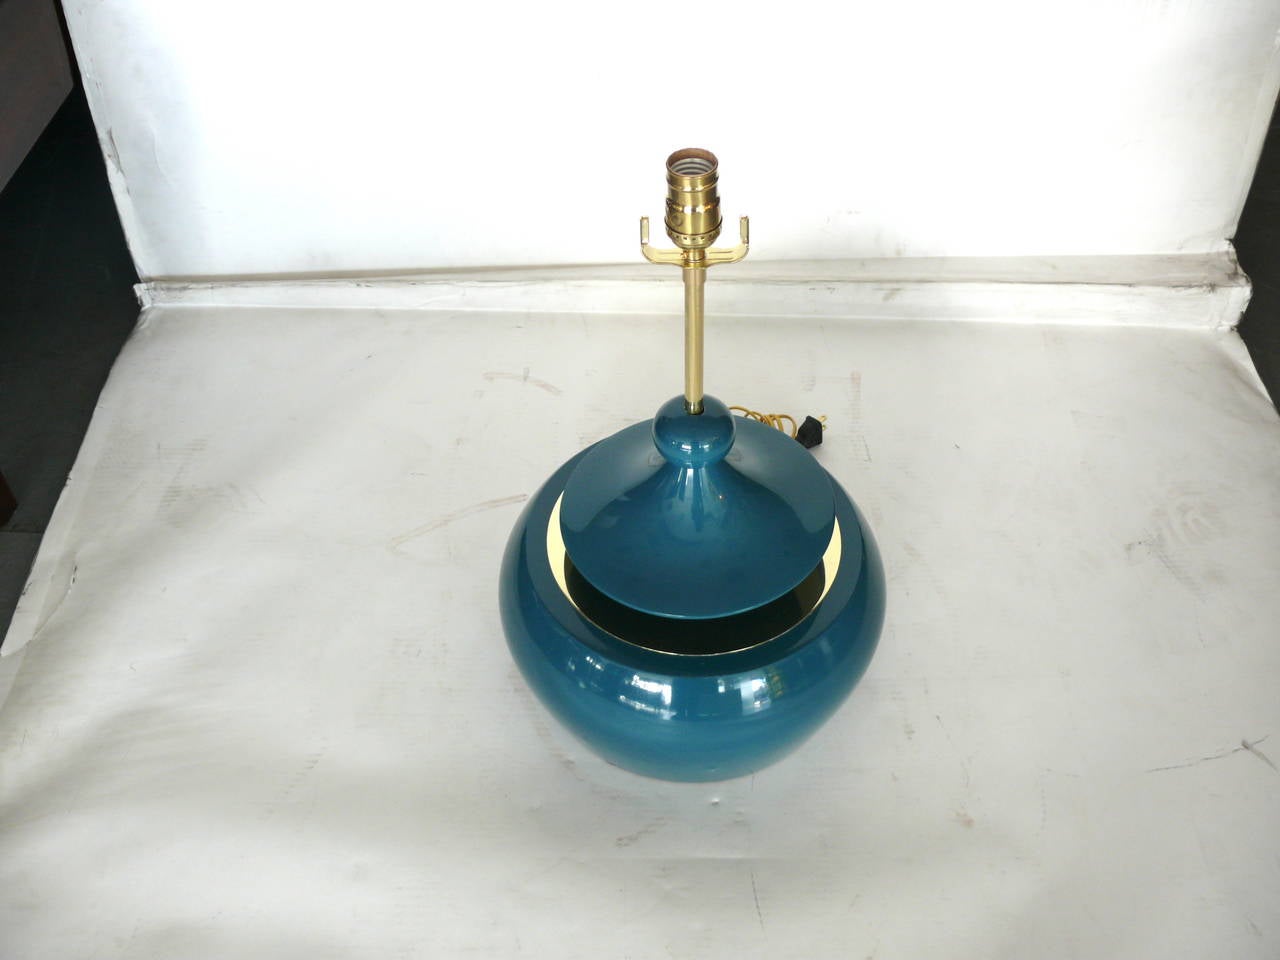 Handsome pair of solid wood table lamps finished in a lacquered teal with brass hardware. Large in scale. Floating wood platform with pull chain on stem allows for a push on and push off light. Newly wired.